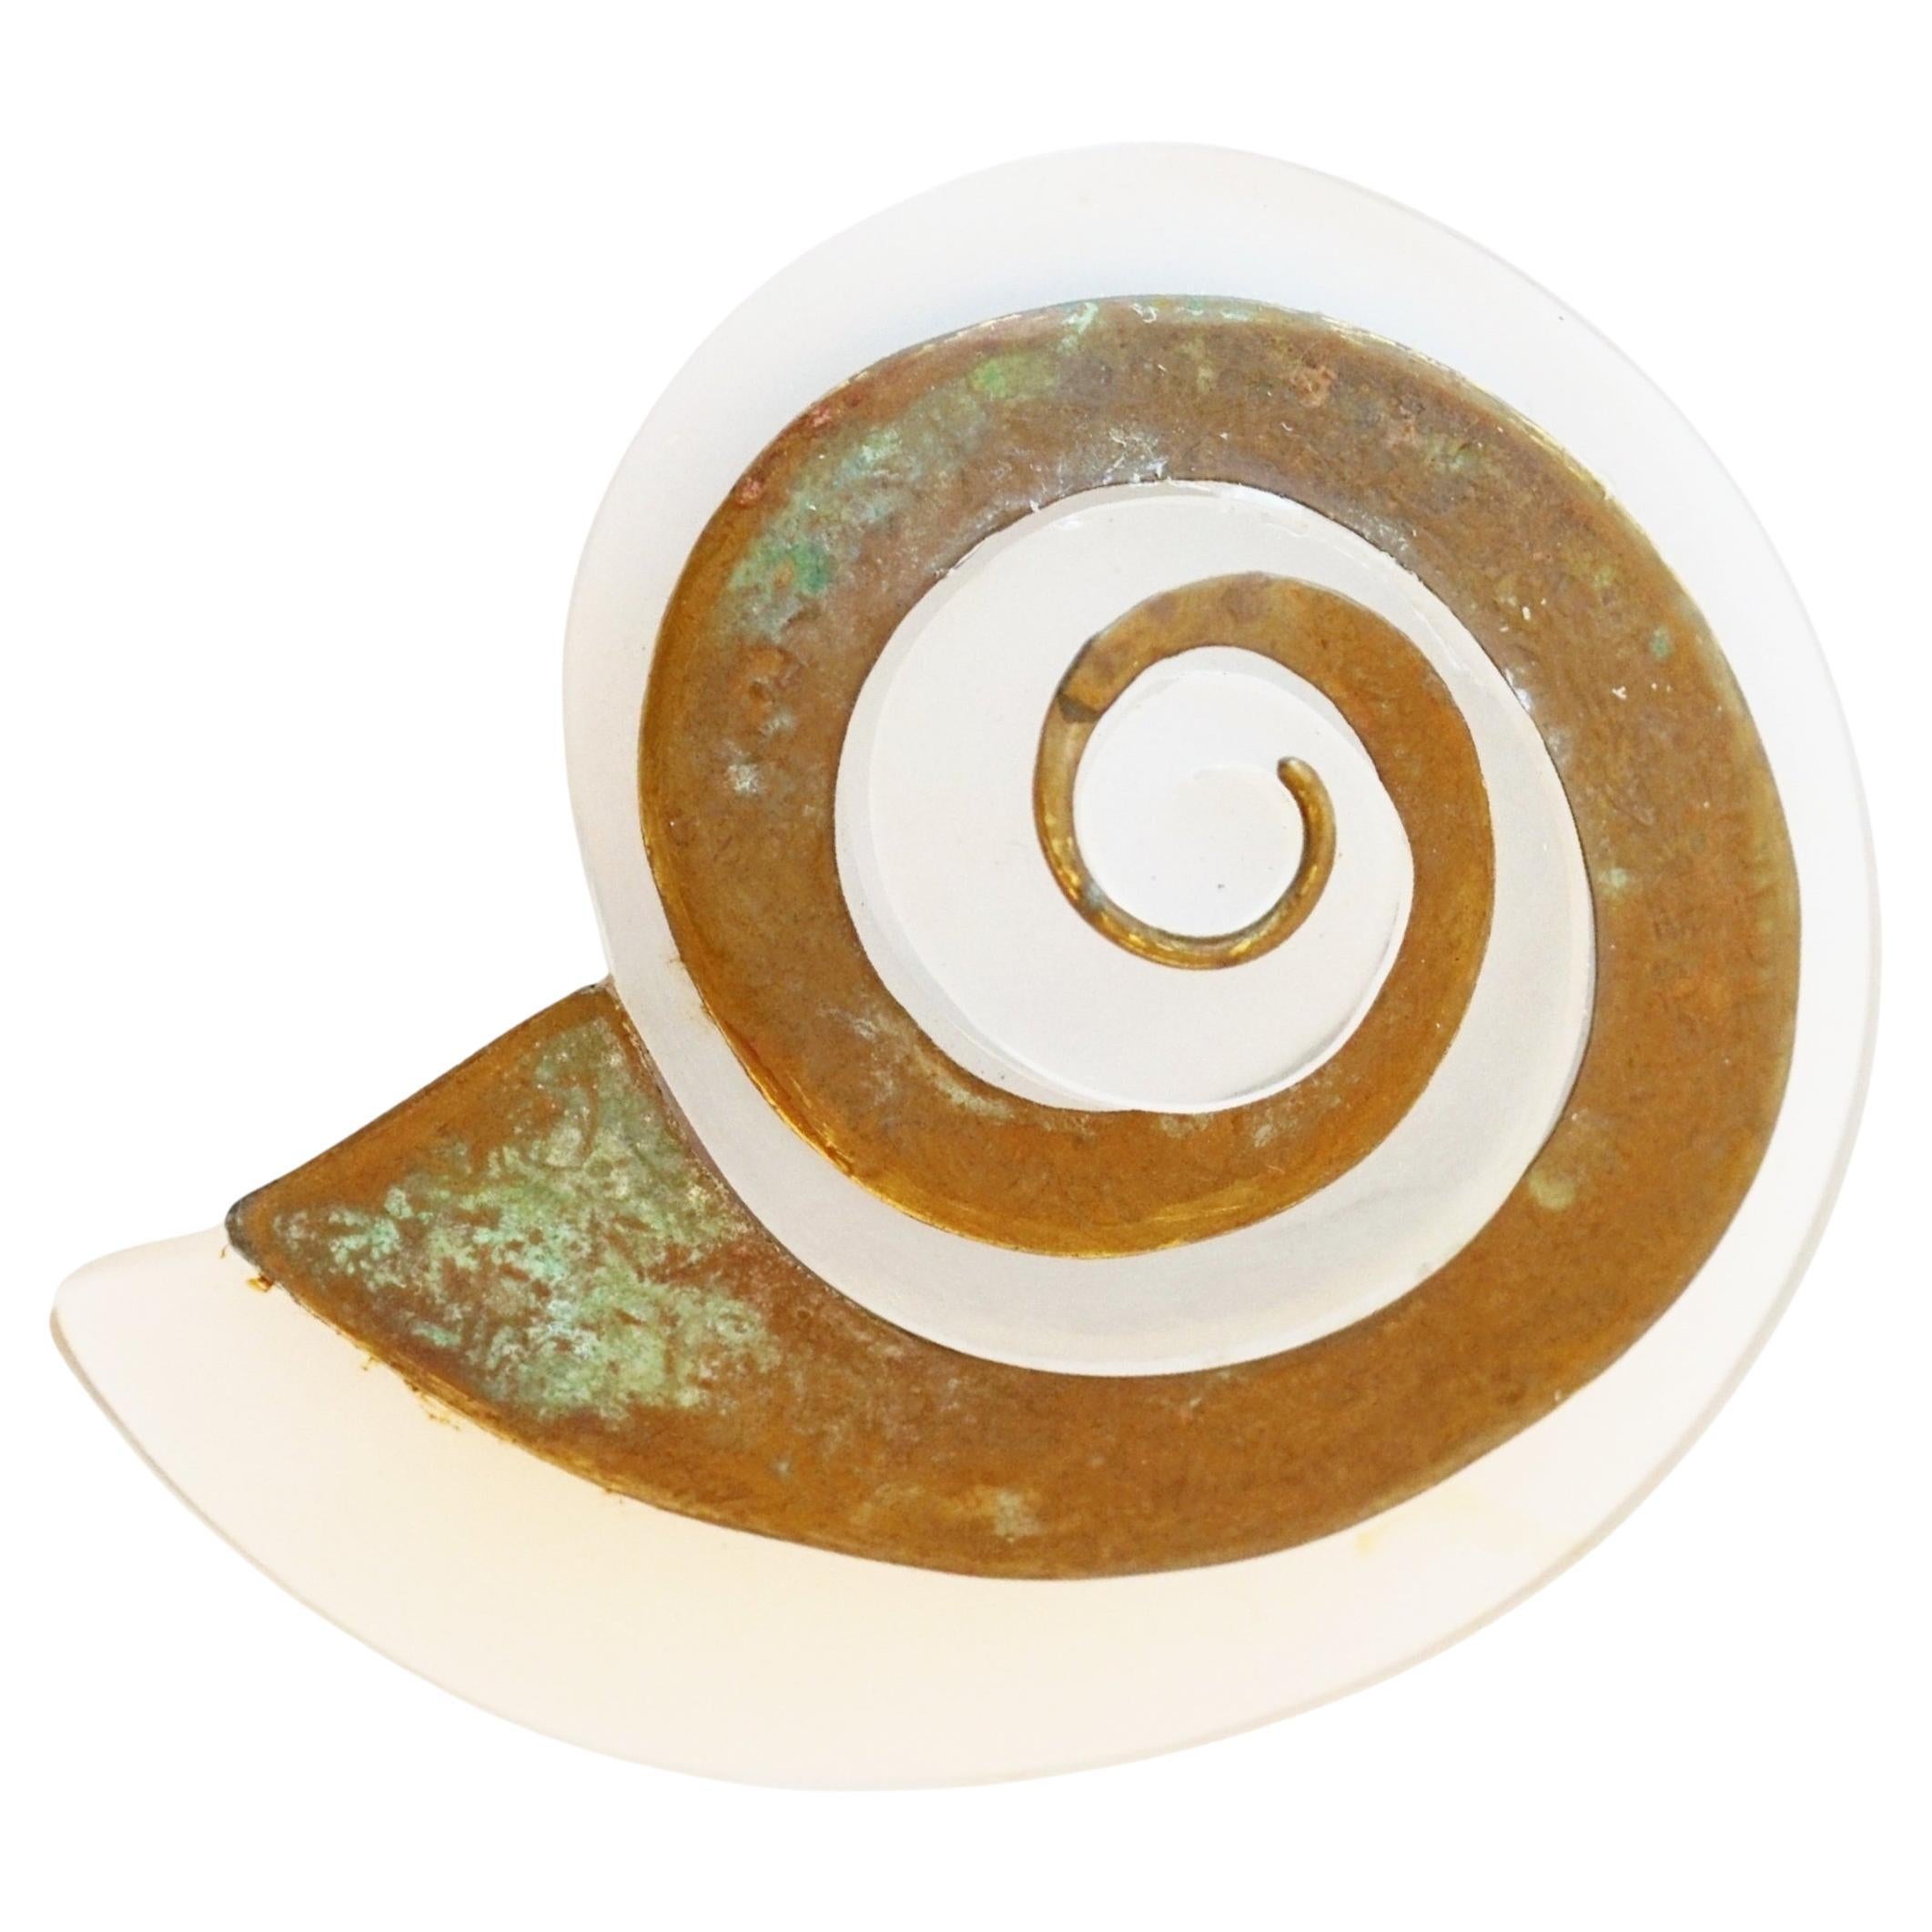 Oversized Lucite & Patinated Brass Swirl / Snail Brooch By Fabrice Paris, 1970s For Sale